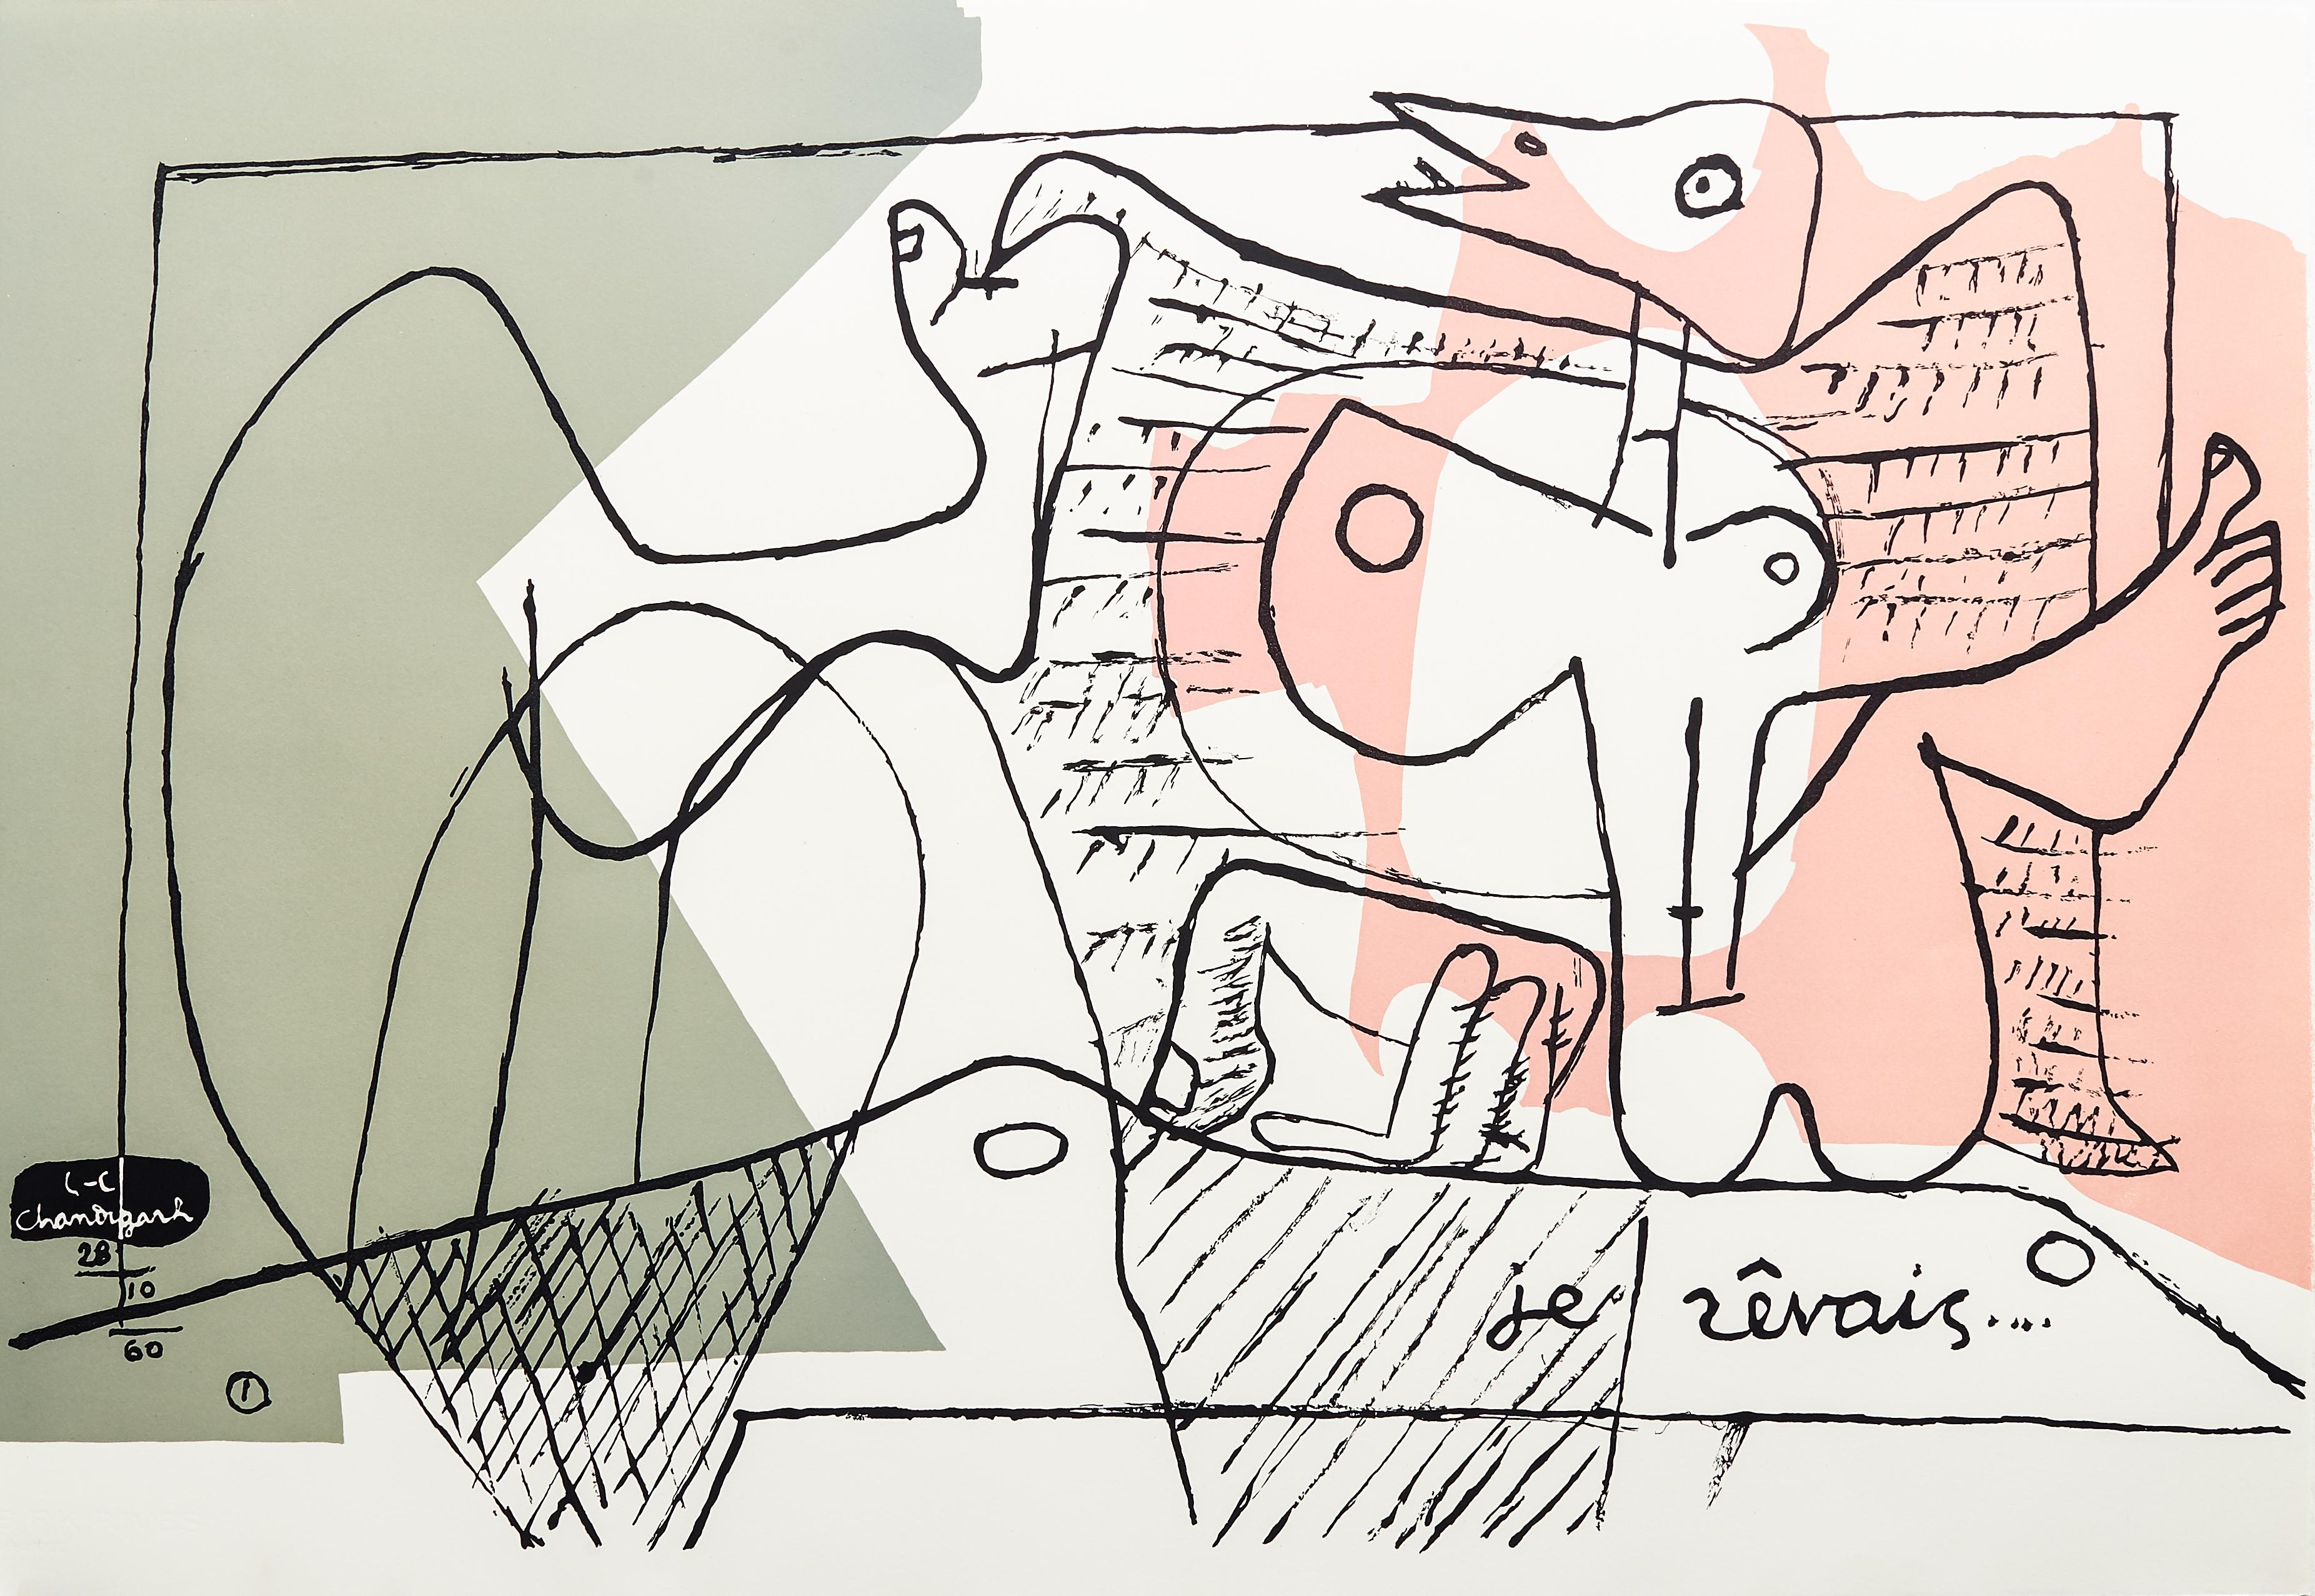 Je Révais, Lithograph From the "cortège..." Portfolio, Signed & Dated in Stone - Print by Le Corbusier